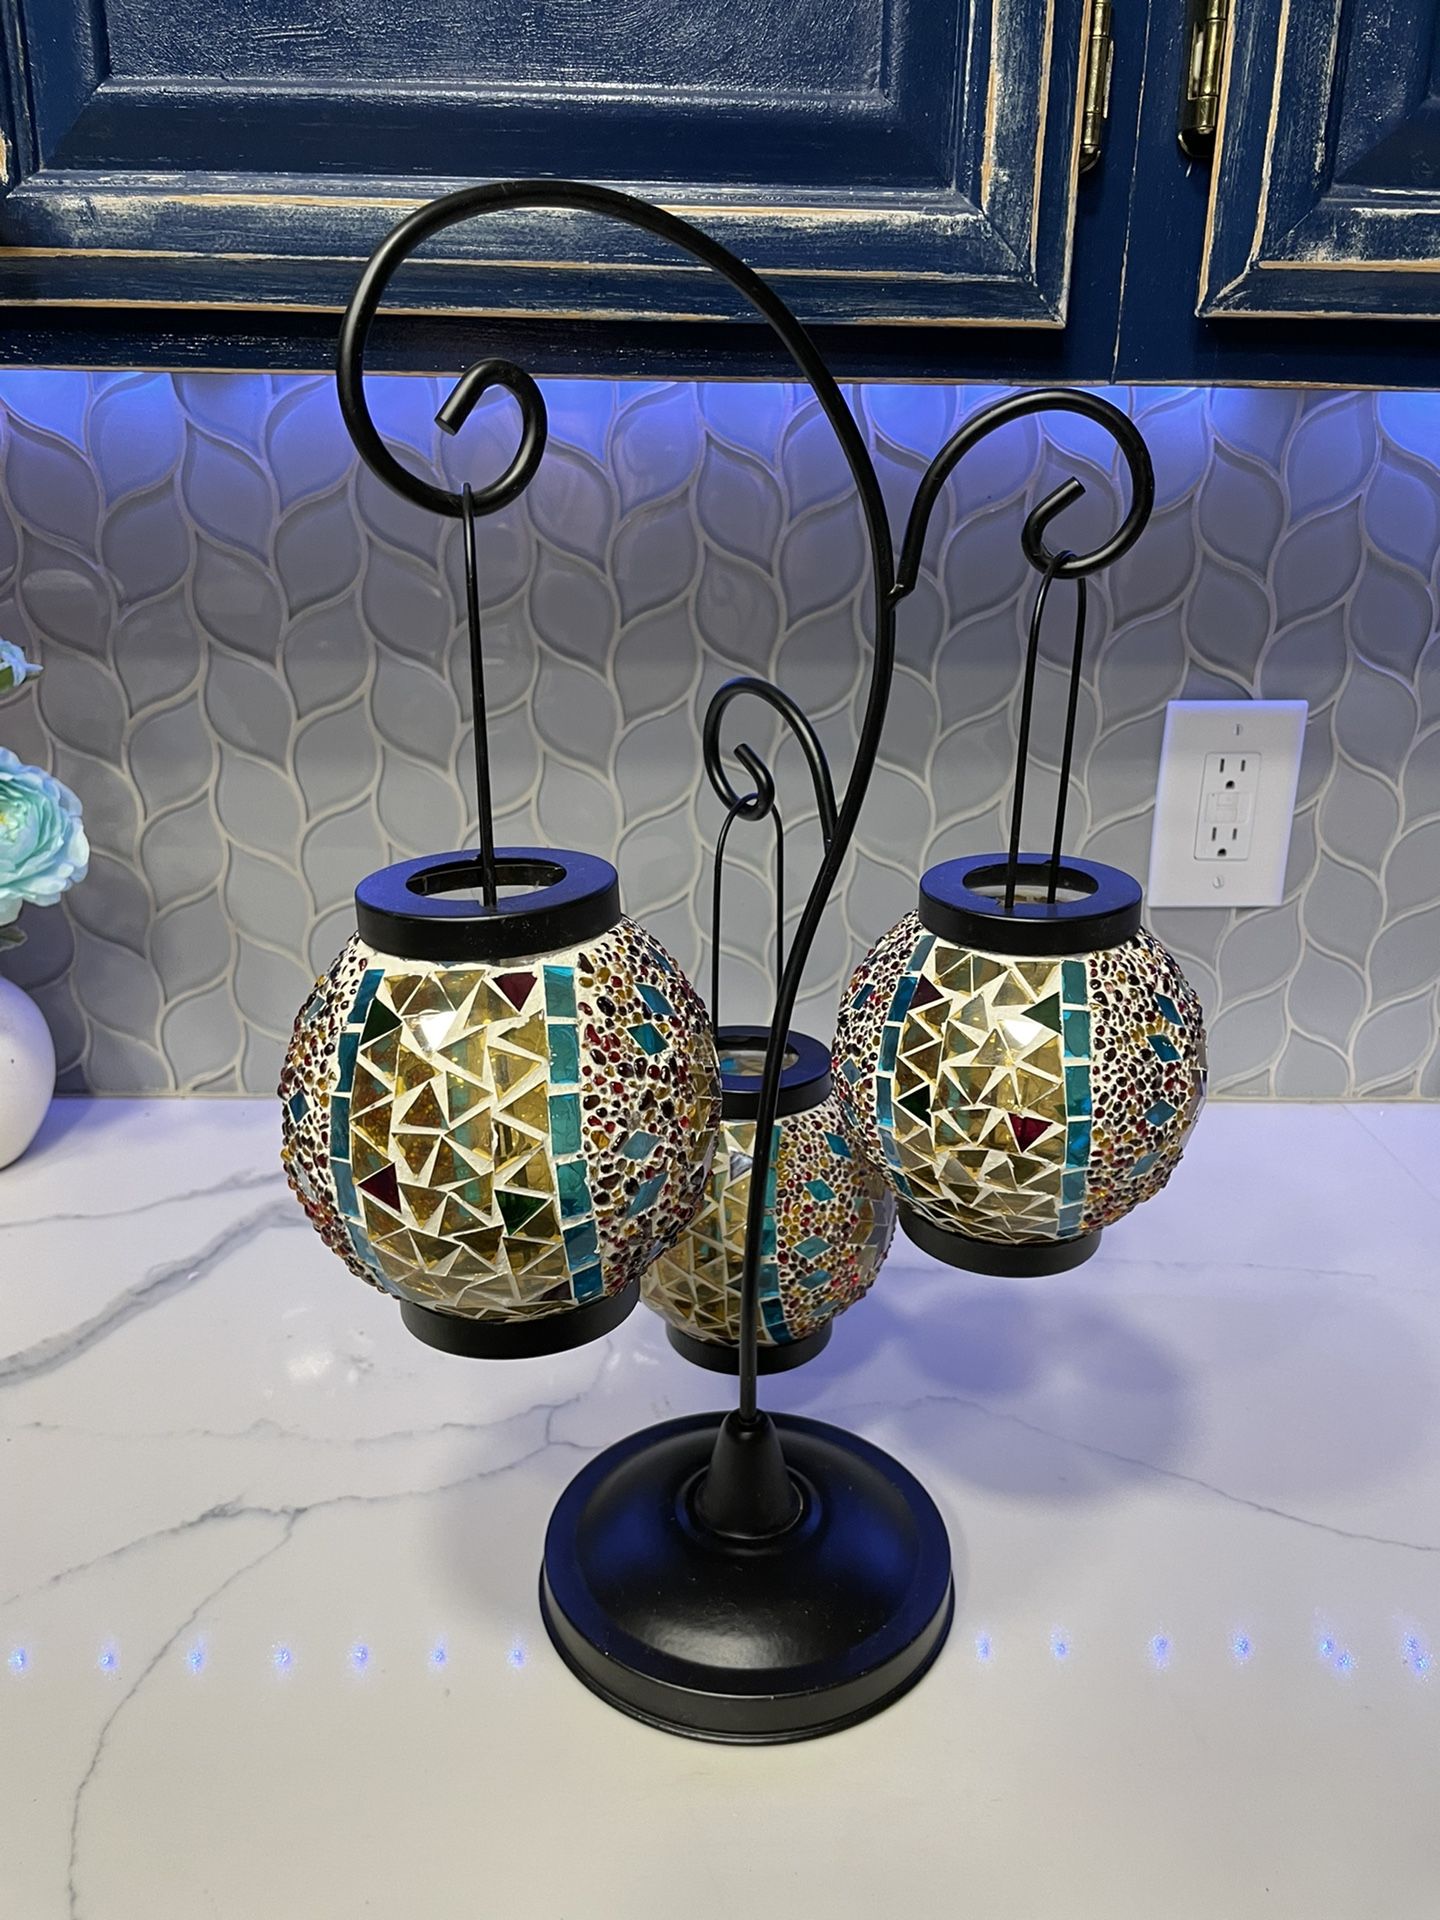 Hanging Tea Candle Stained Glass Globes And Stand